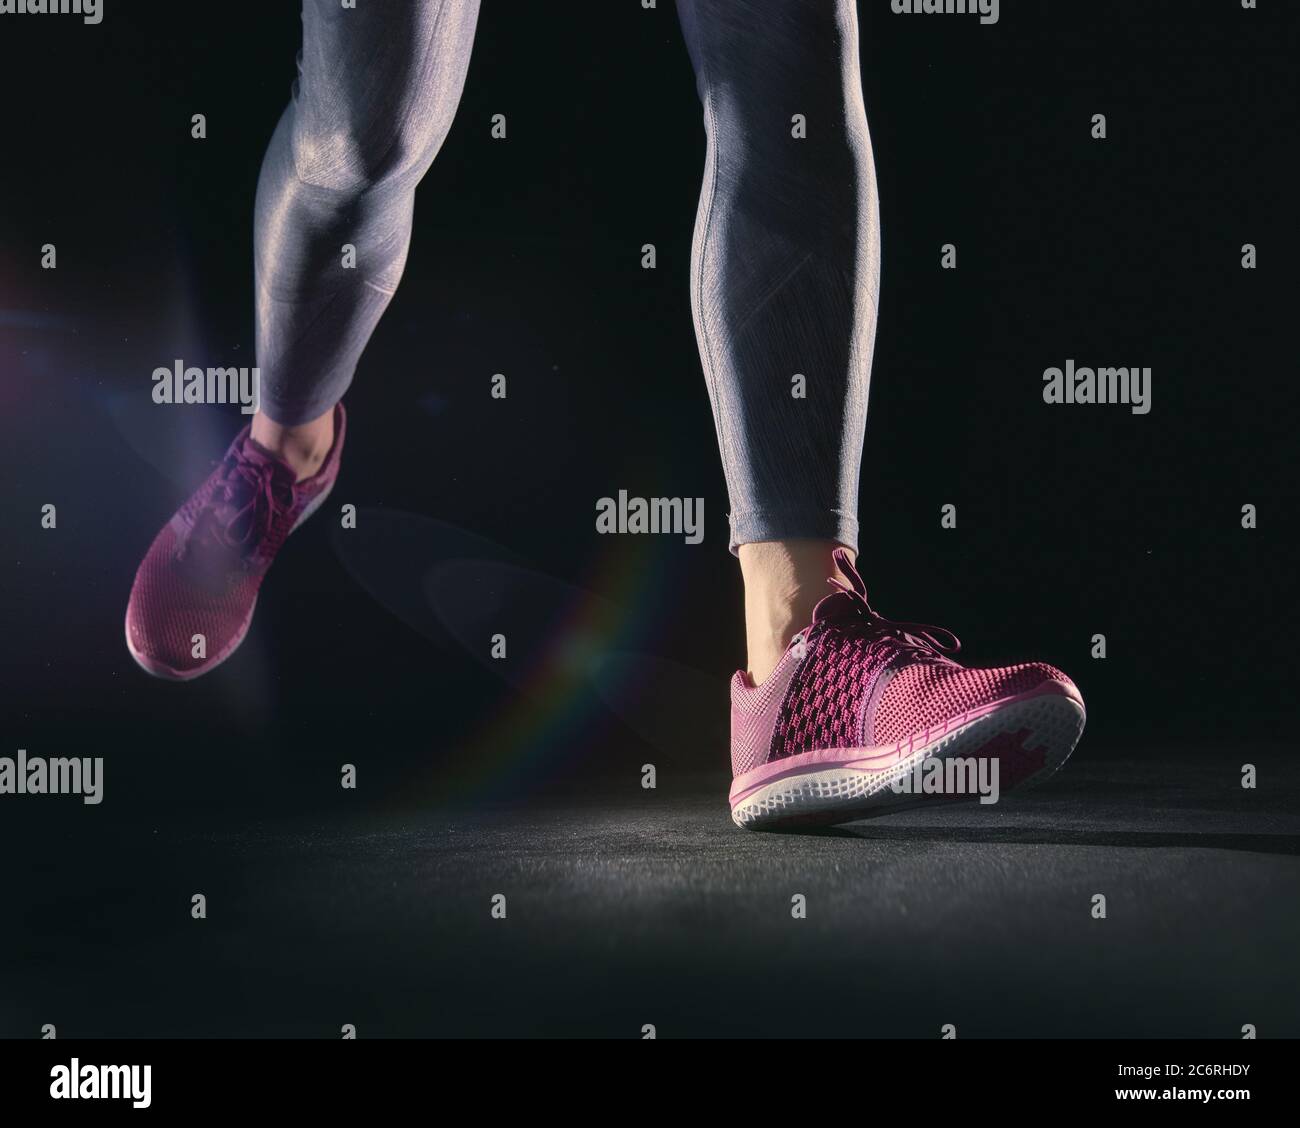 Athlete's Foot High Resolution Stock Photography and Images - Alamy